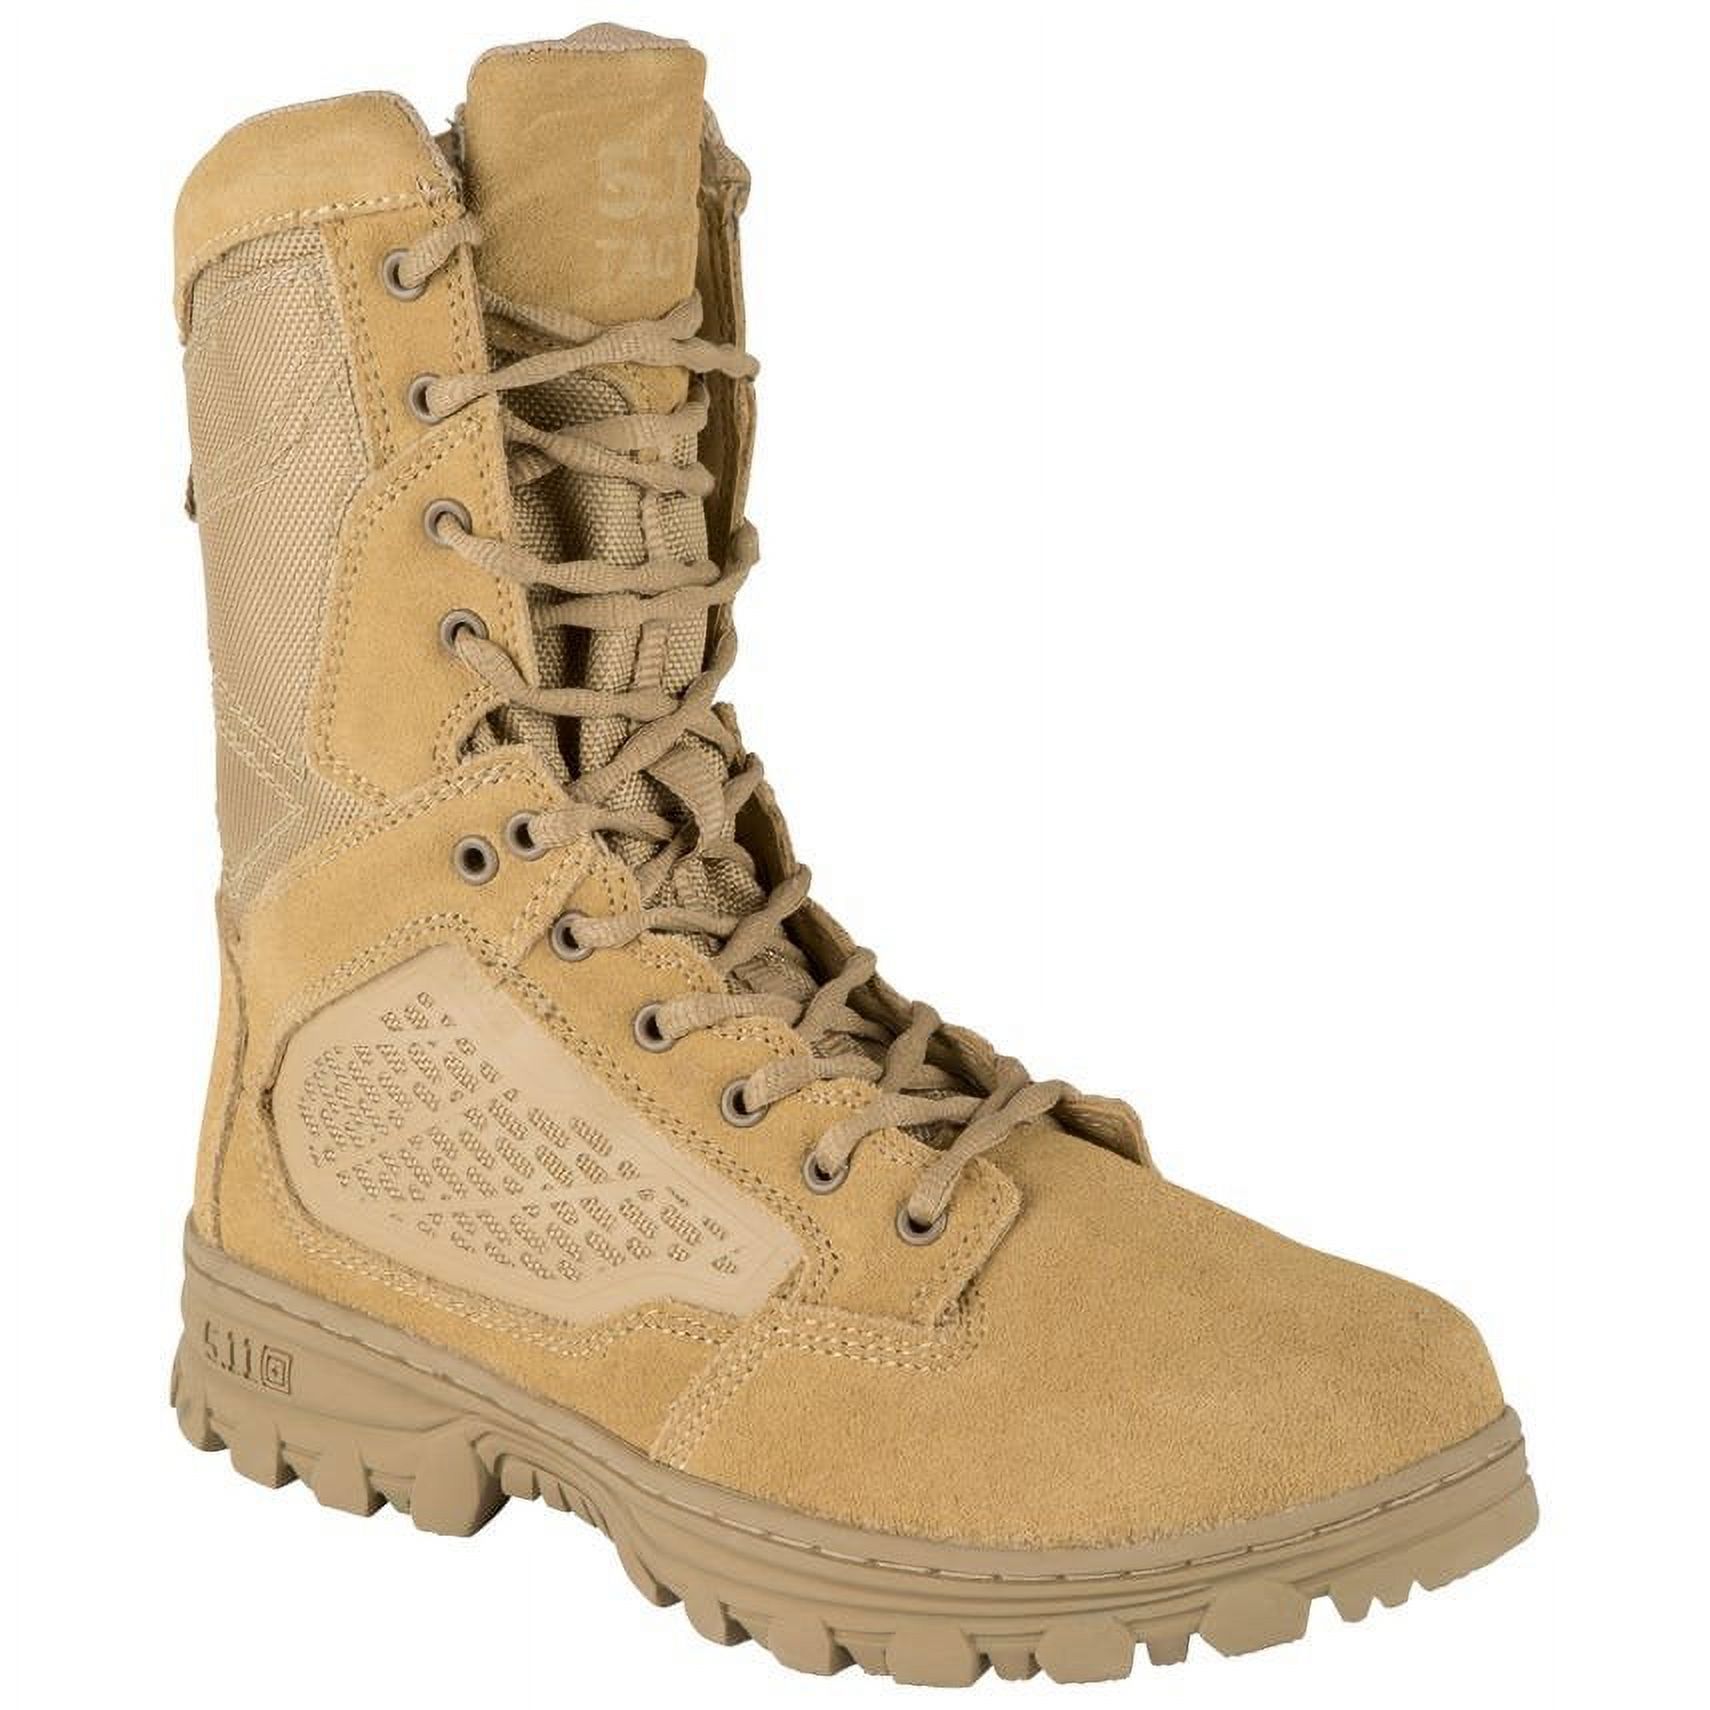 5.11 Work Gear EVO 8-Inch Waterproof Boots, Oil/Slip-Resistant, OrthoLite Insole, Coyote, 6.5/Regular, Style 12347 - image 1 of 4